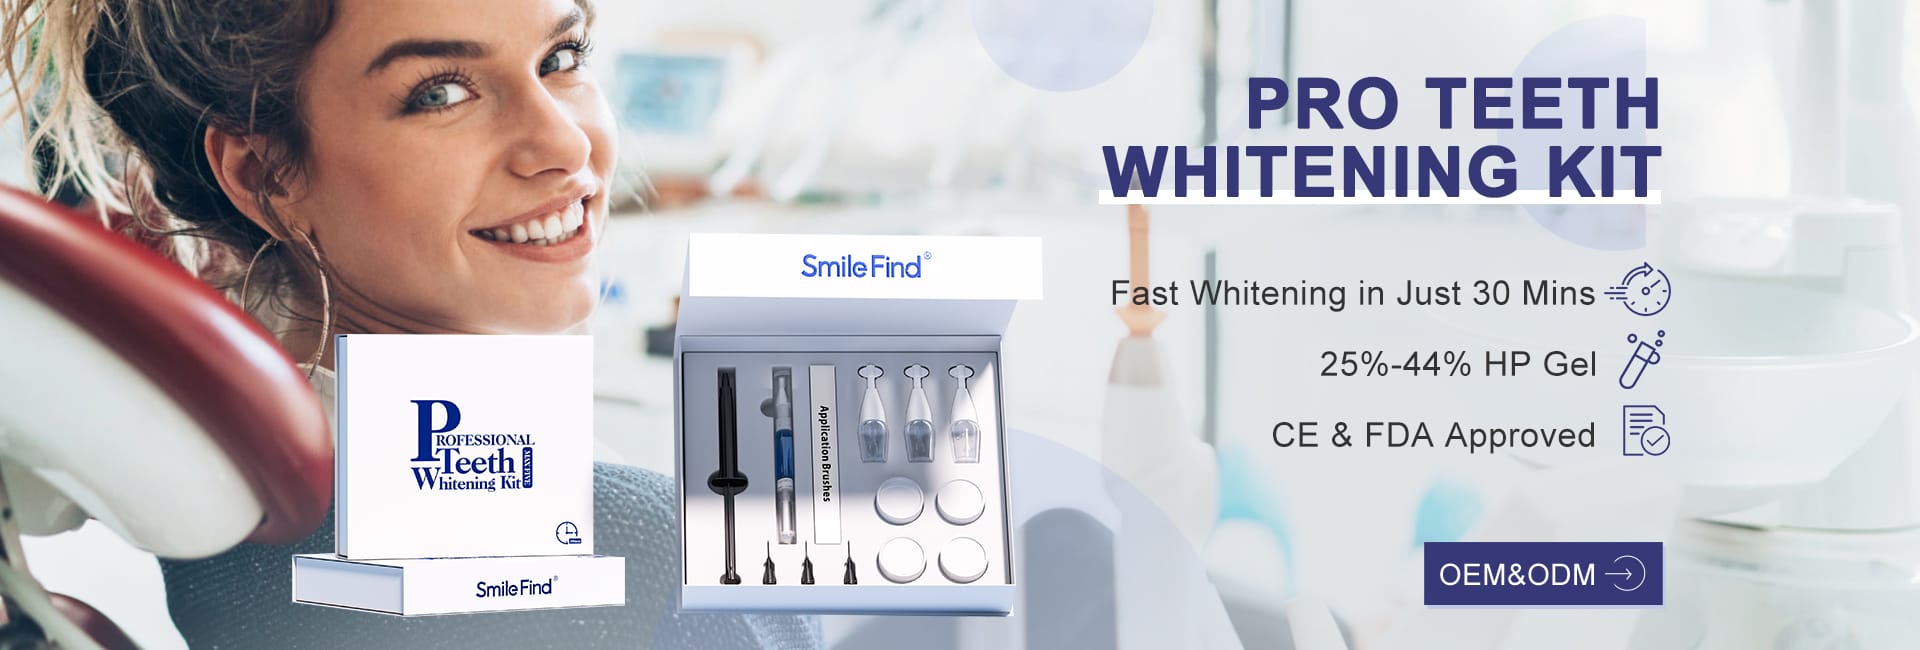 Cold light whitening of teeth has these few advantages